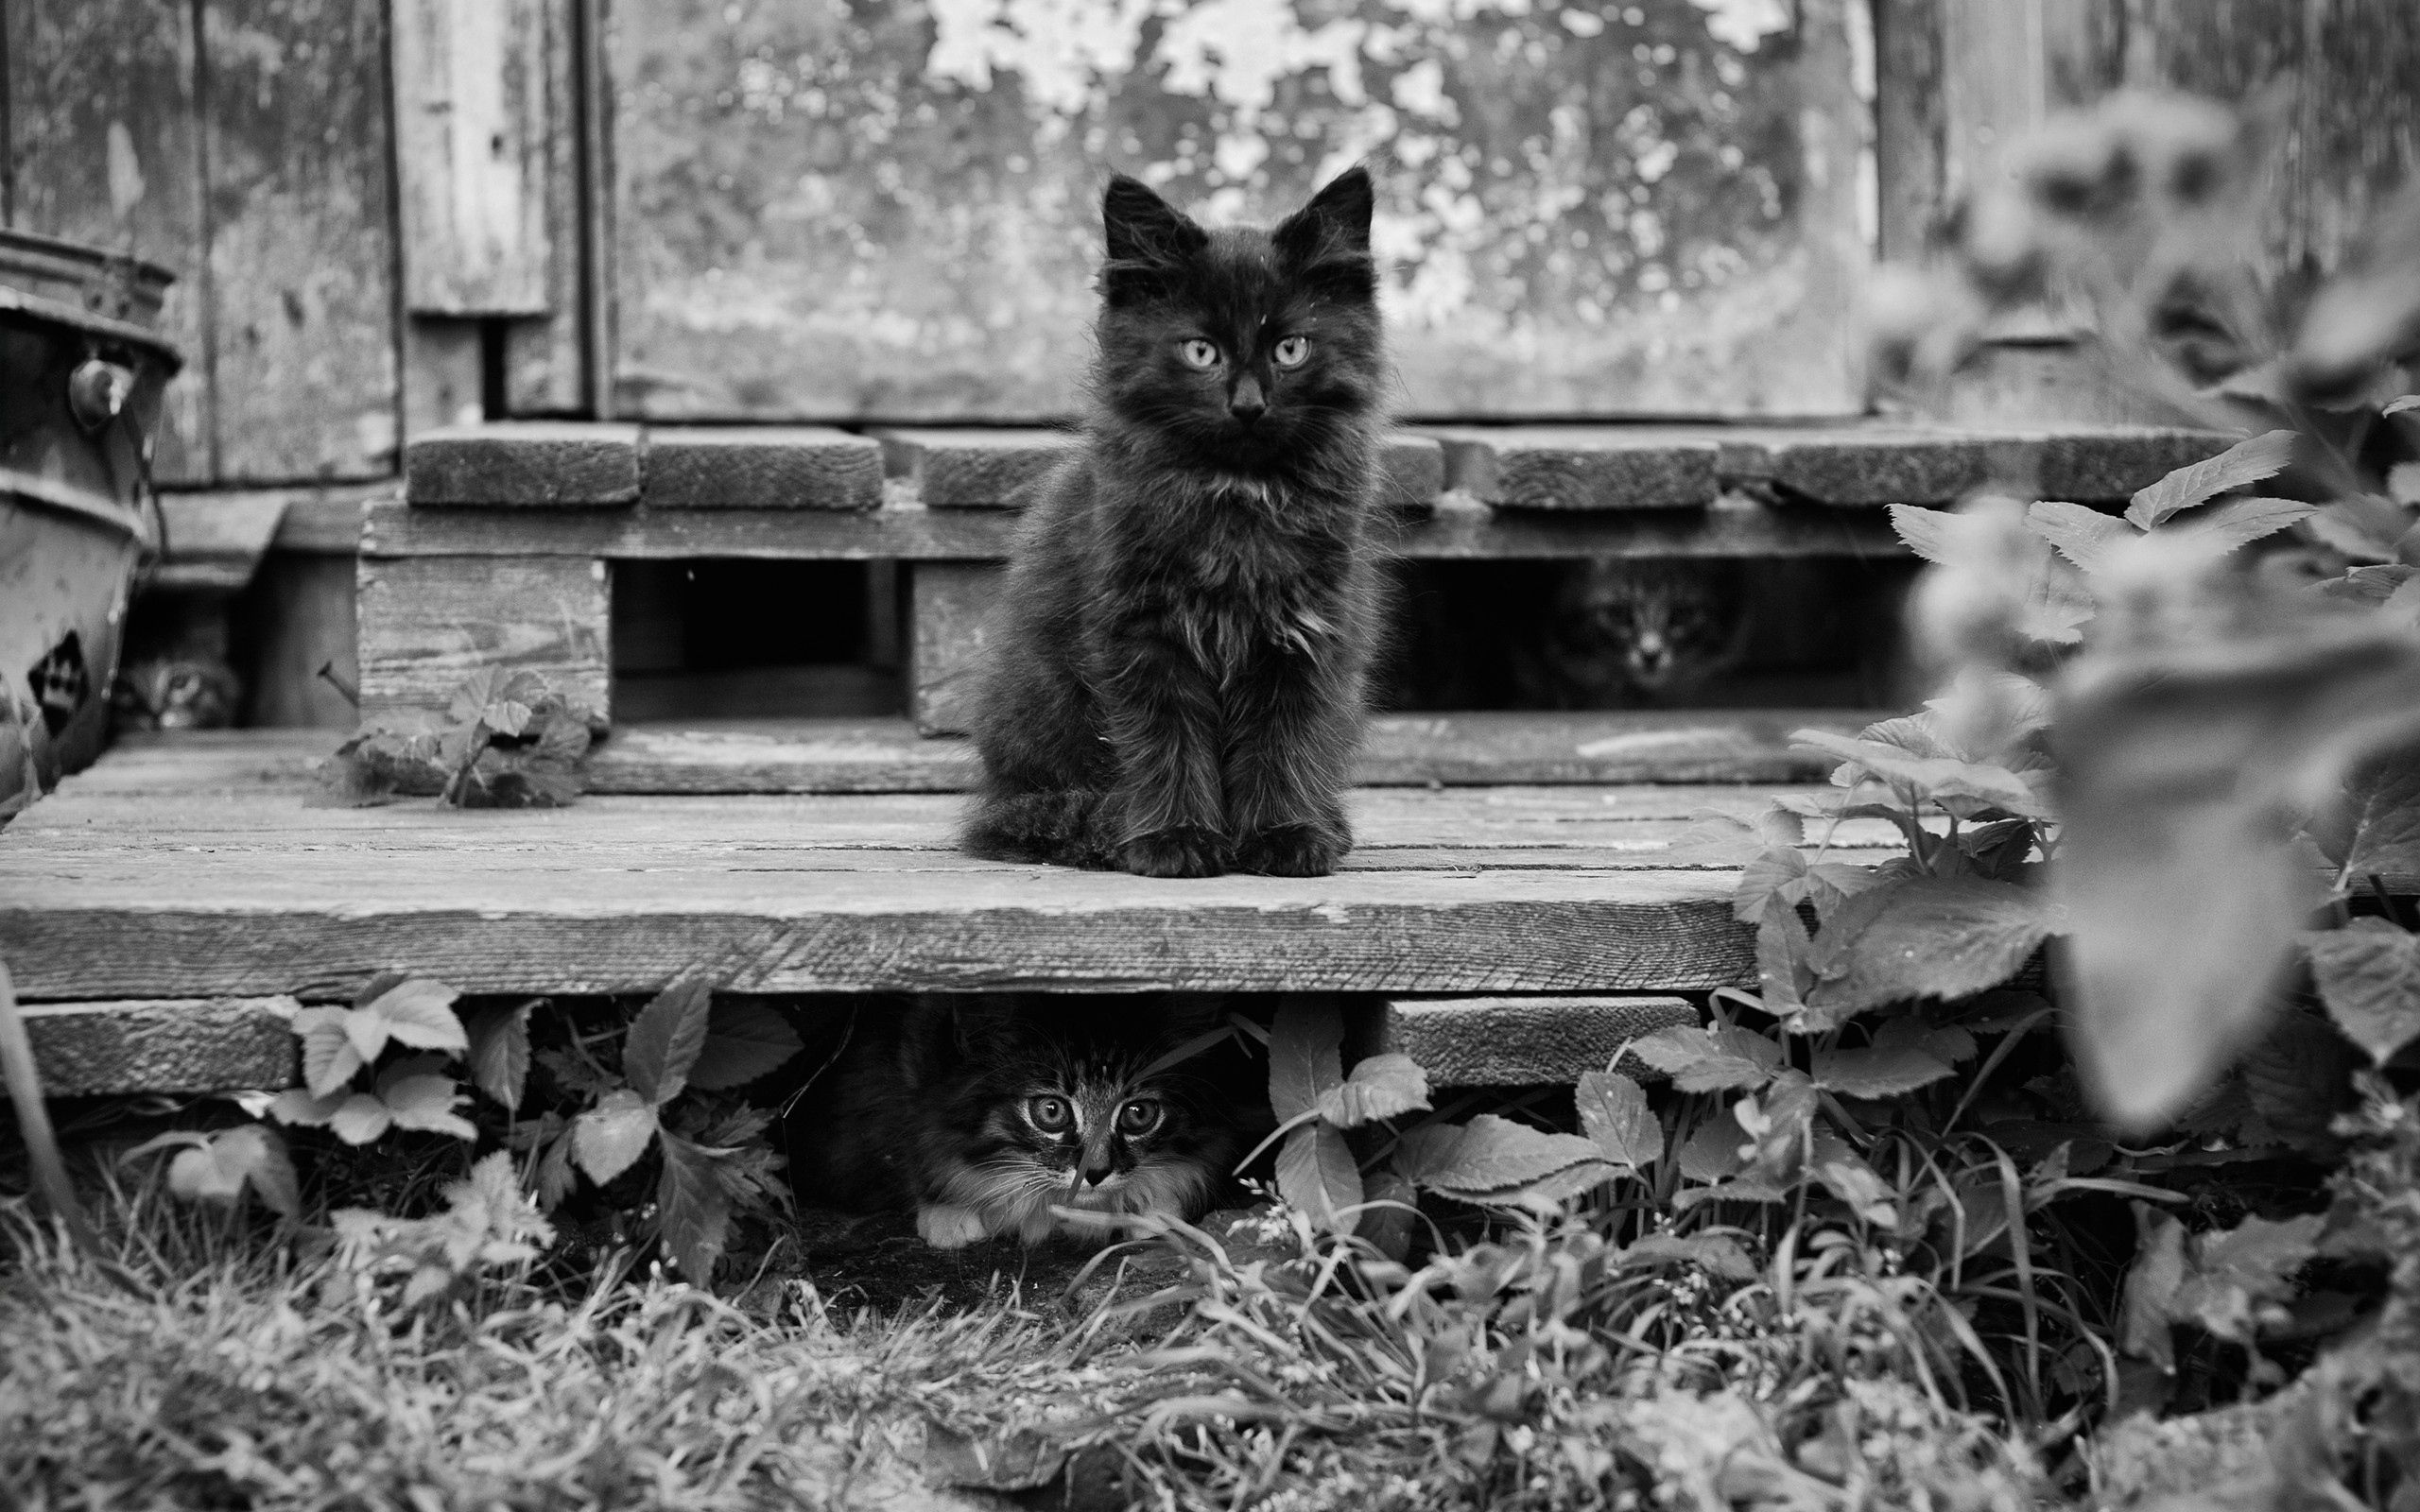 hide, kitty, animals, sit, fluffy, kitten, bw, chb, expectation, waiting, lots of, multitude